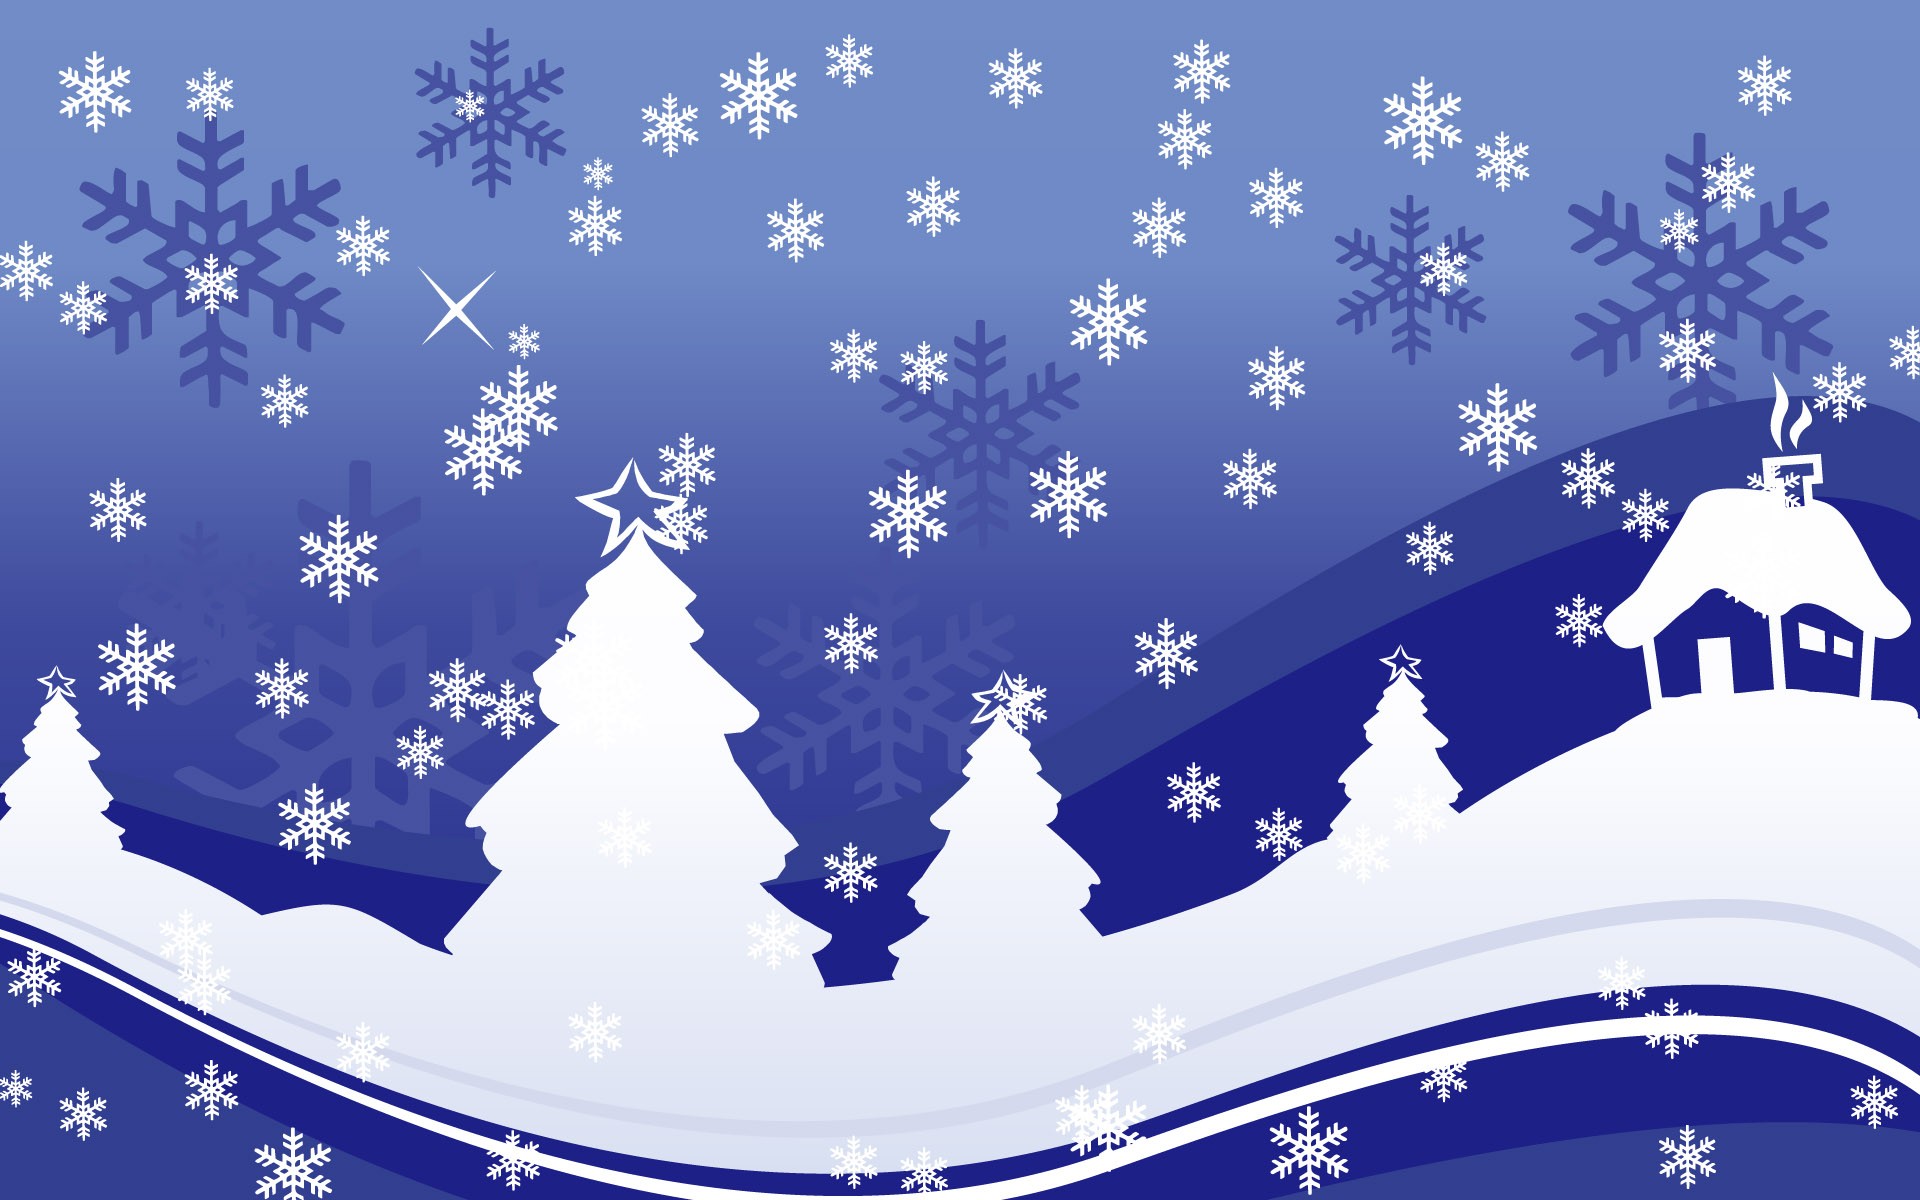 Exquisite Christmas Theme HD Wallpapers #33 - 1920x1200